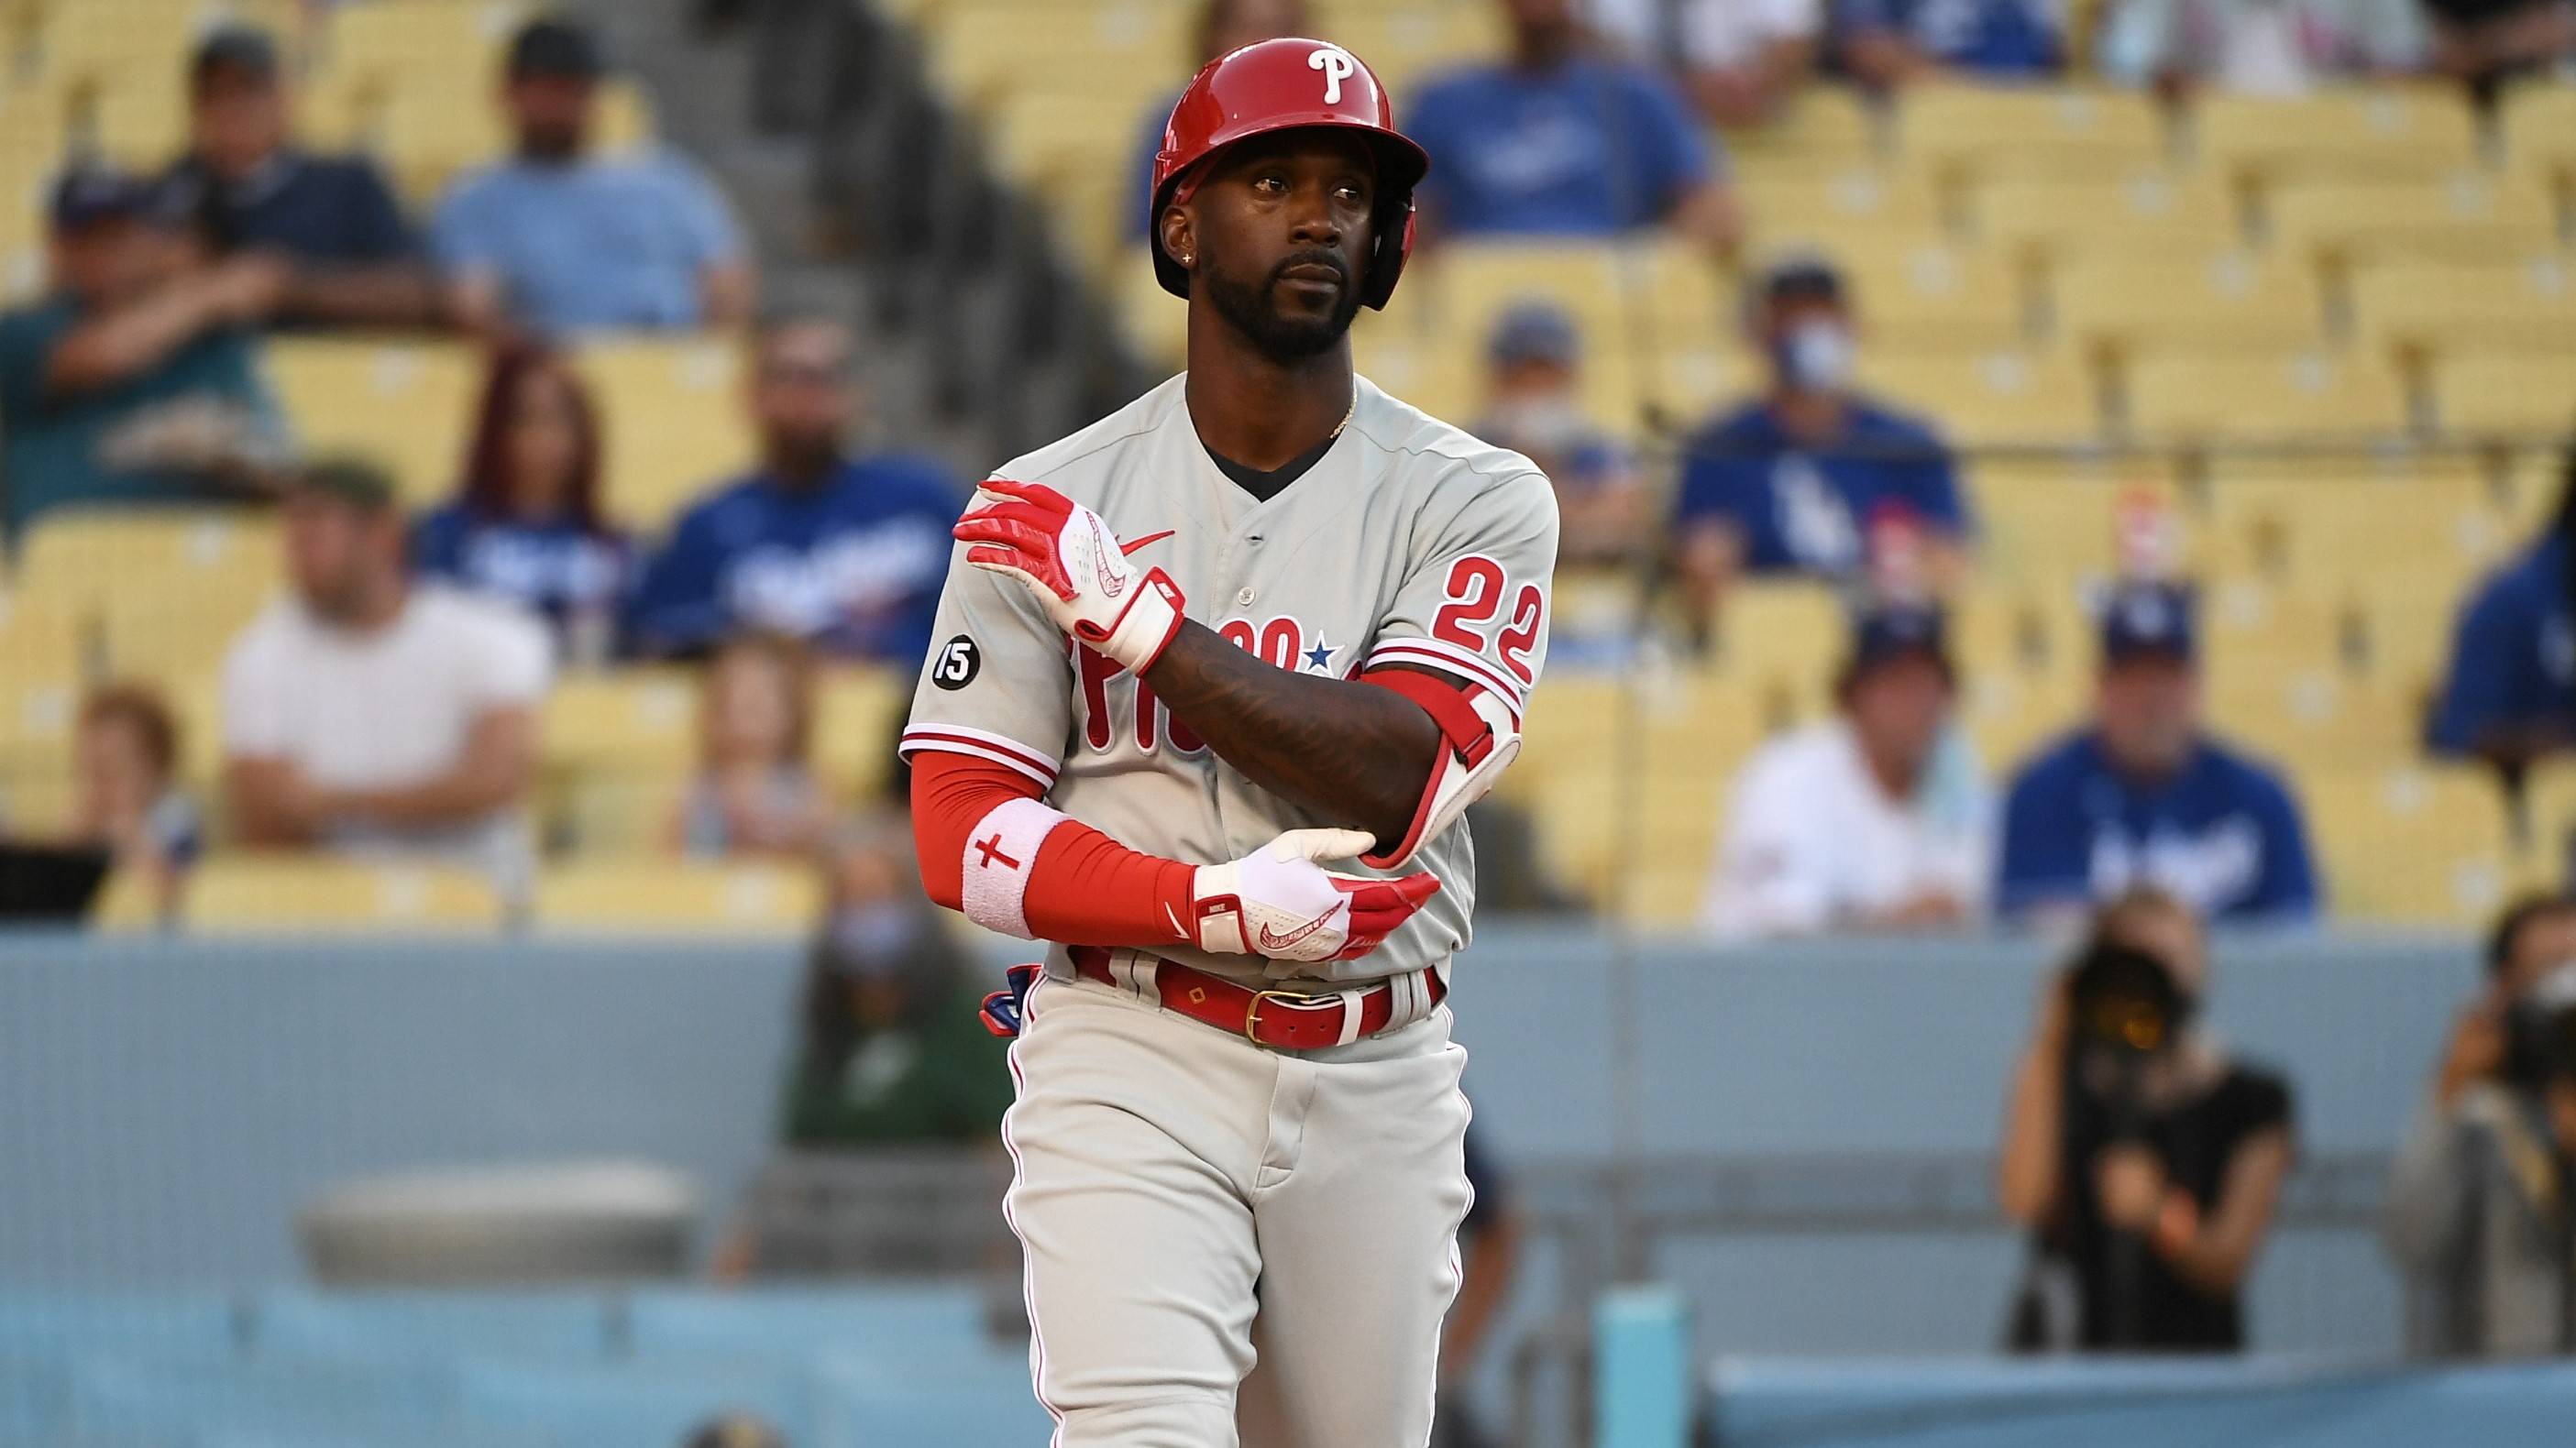 Phillies red uniforms will return for Dodgers, Giants series – NBC